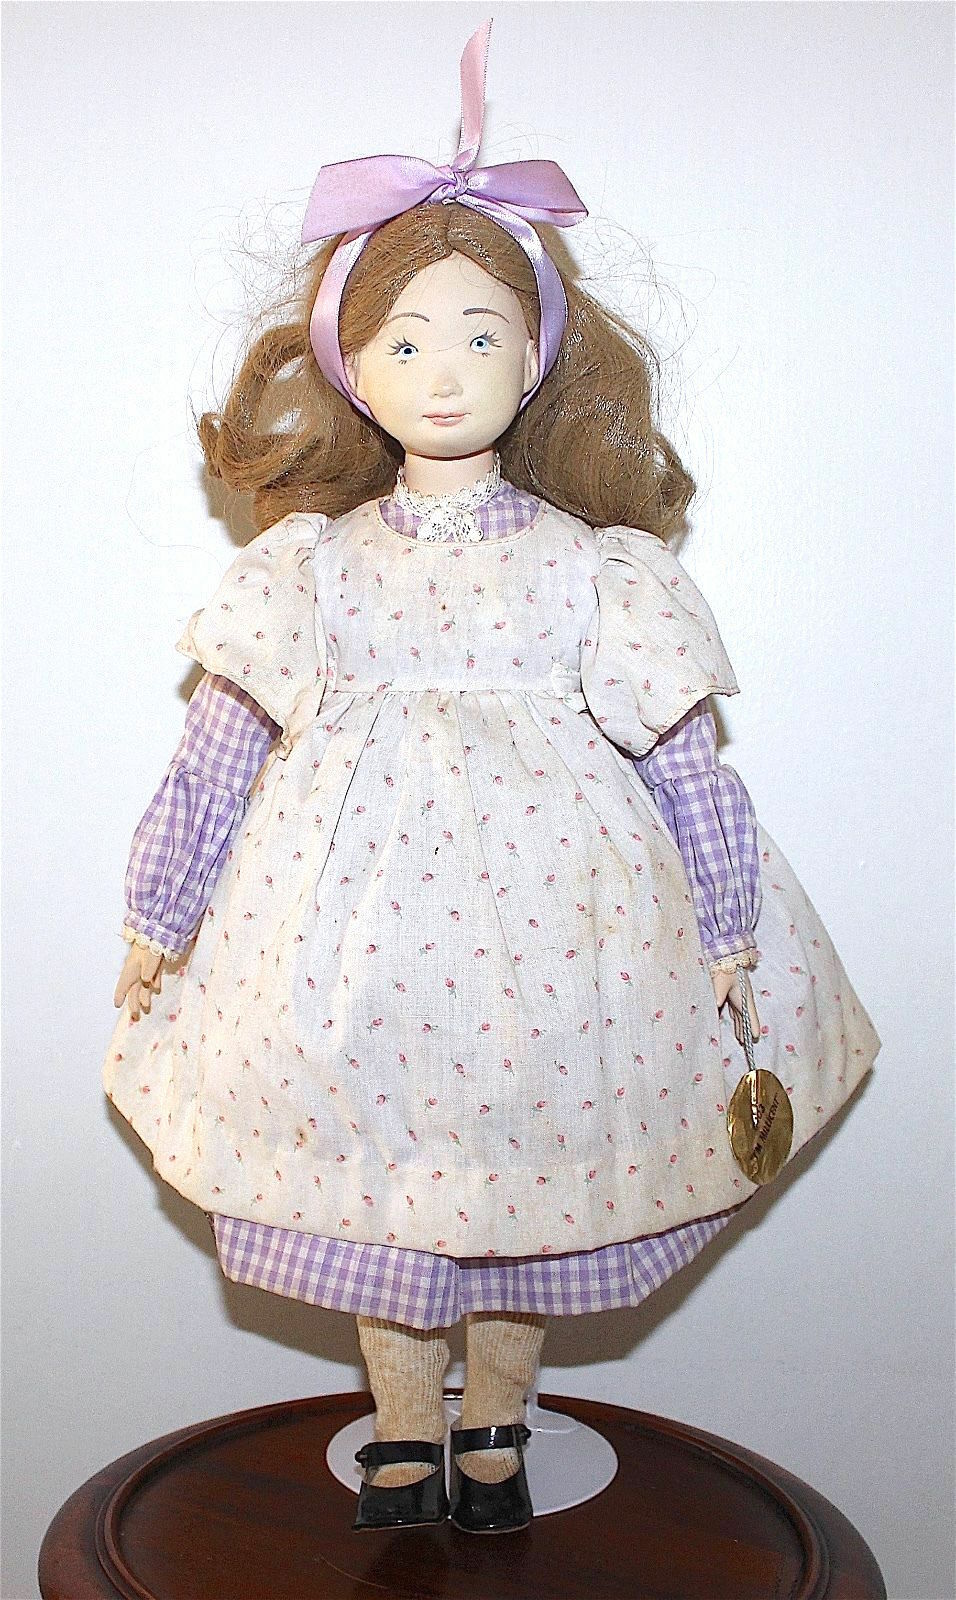 1973 Vntg Suzanne Gibson Millicent #103 Kalico Kid 18" Doll + Tag Bisque/cloth